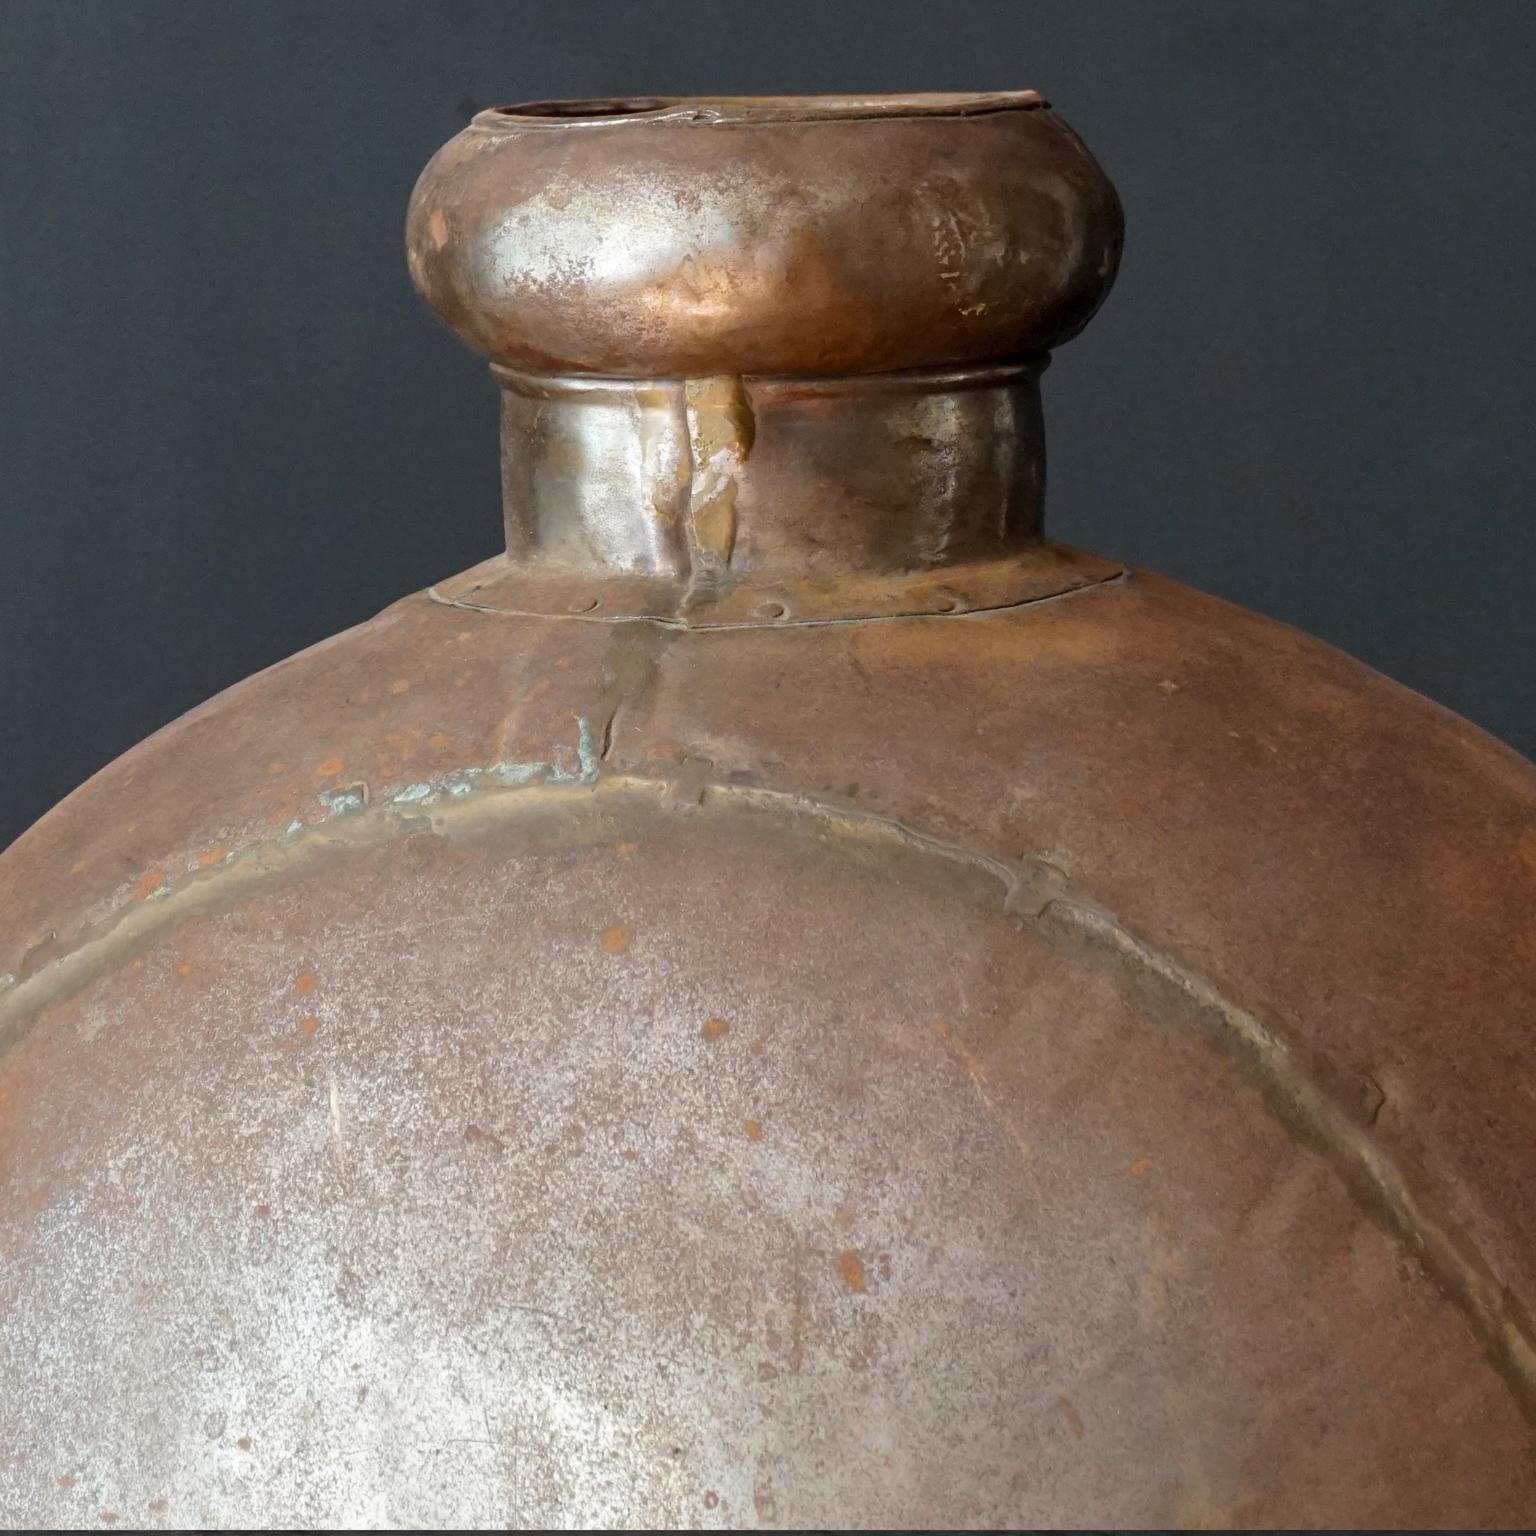 1950s Indian Hand-Hammered Large Metal Water Jug or Bottle with Wooden Cork For Sale 3